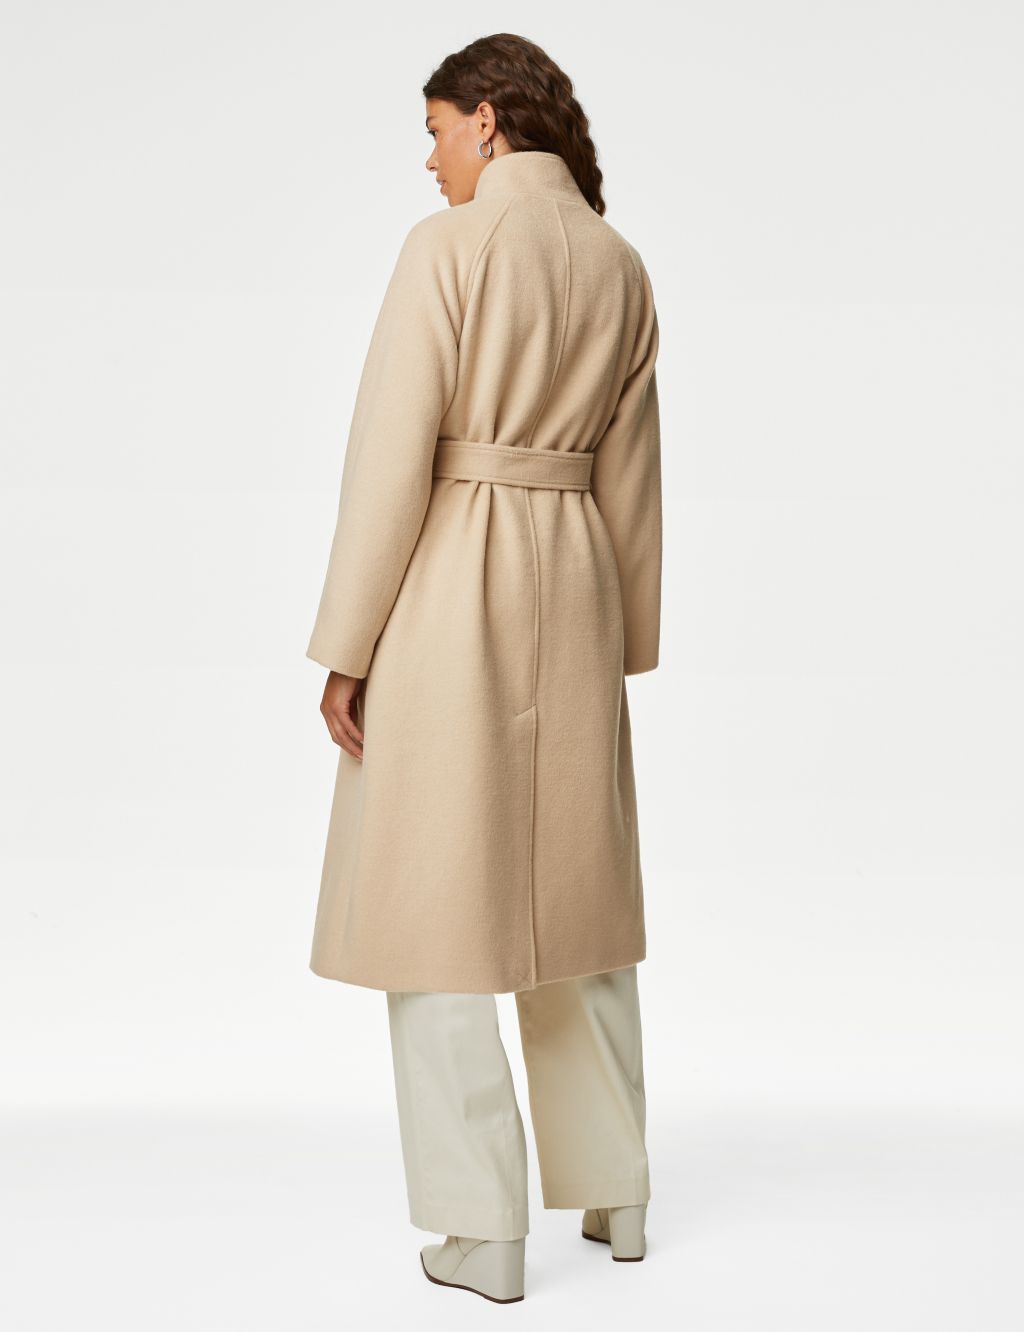 Belted Funnel Neck Wrap Coat with Wool image 5